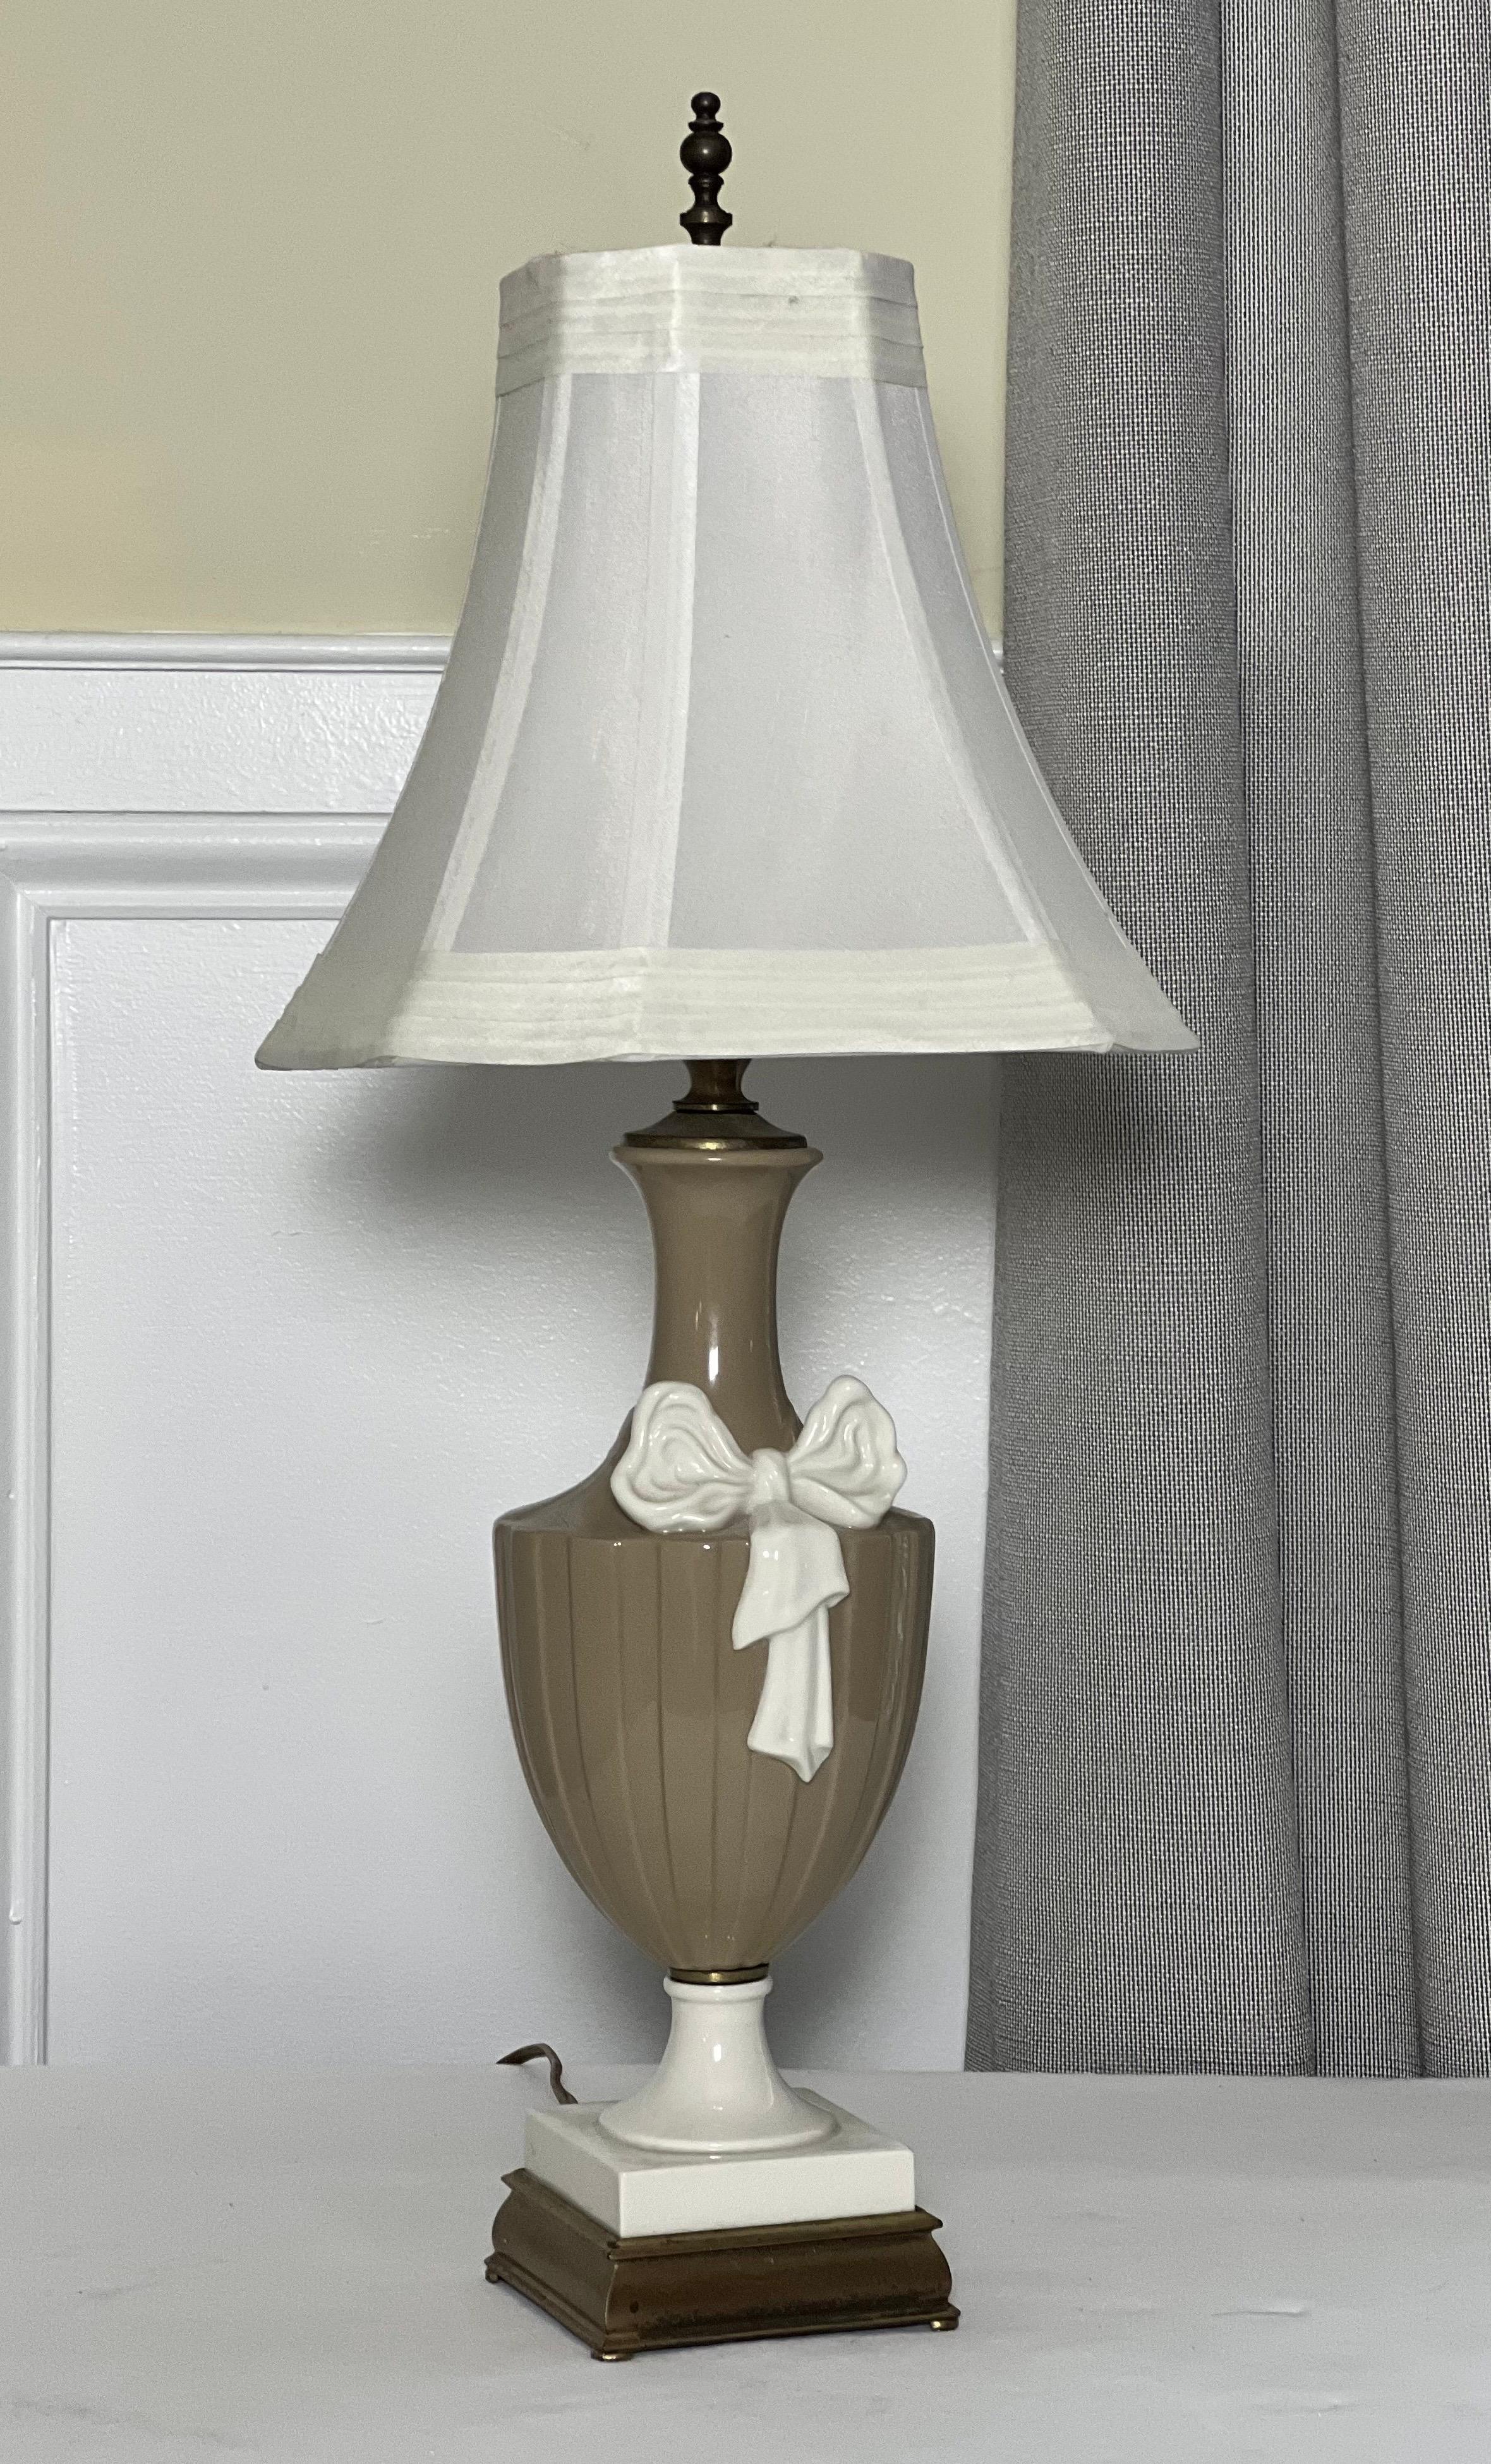 20th Century Lenox Porcelain Lamps in Taupe and White by Dav Art, NY, Pair For Sale 2